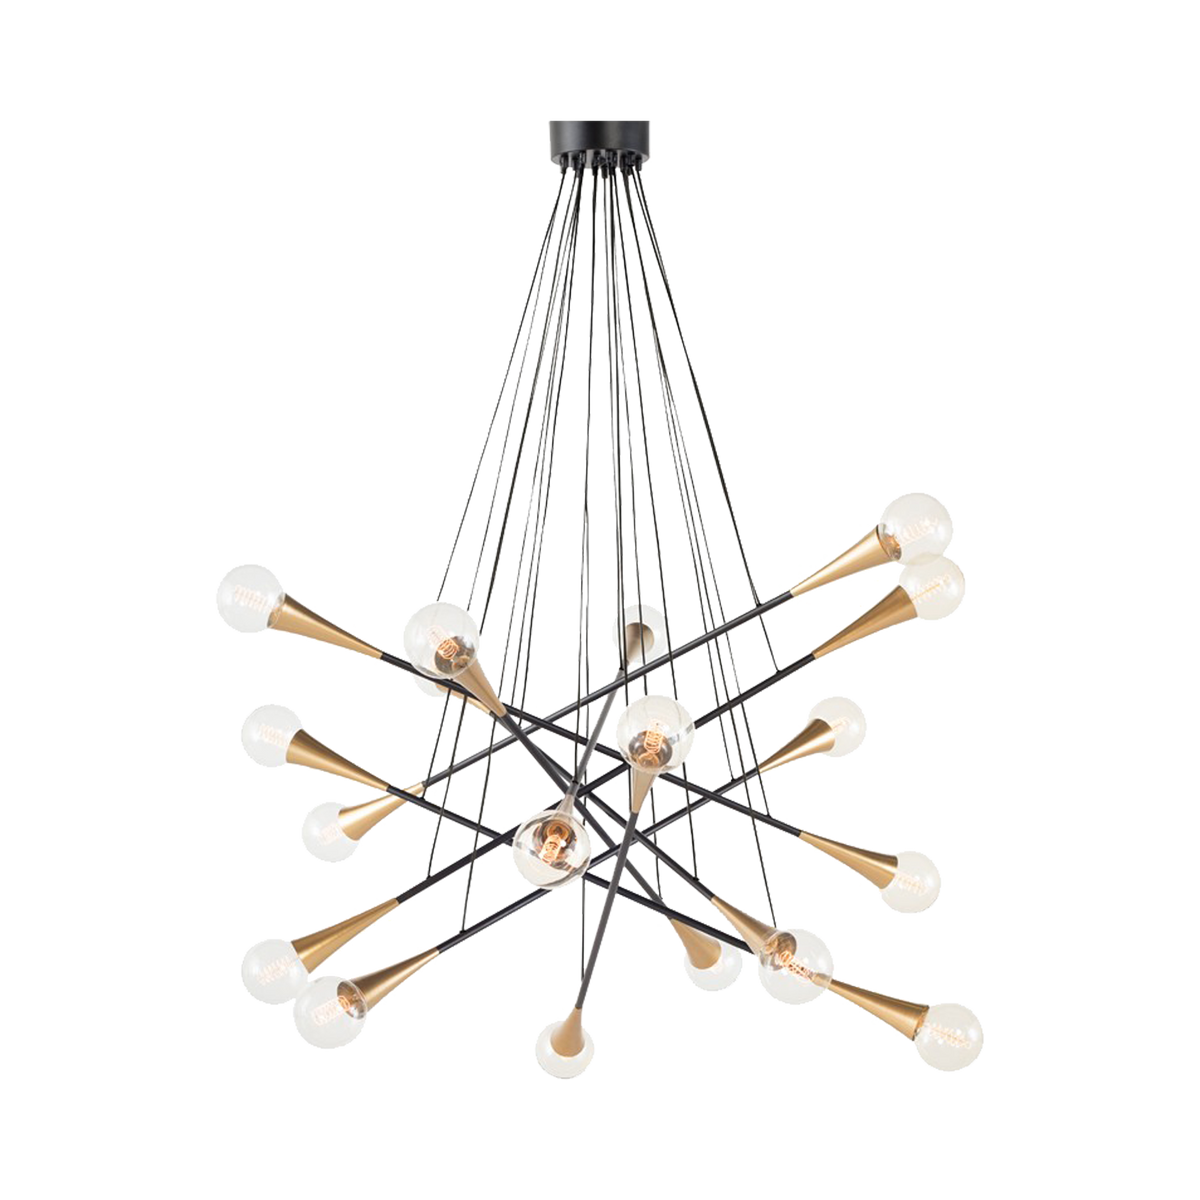 The Galaxy Ceiling Light strikes a commanding presence.